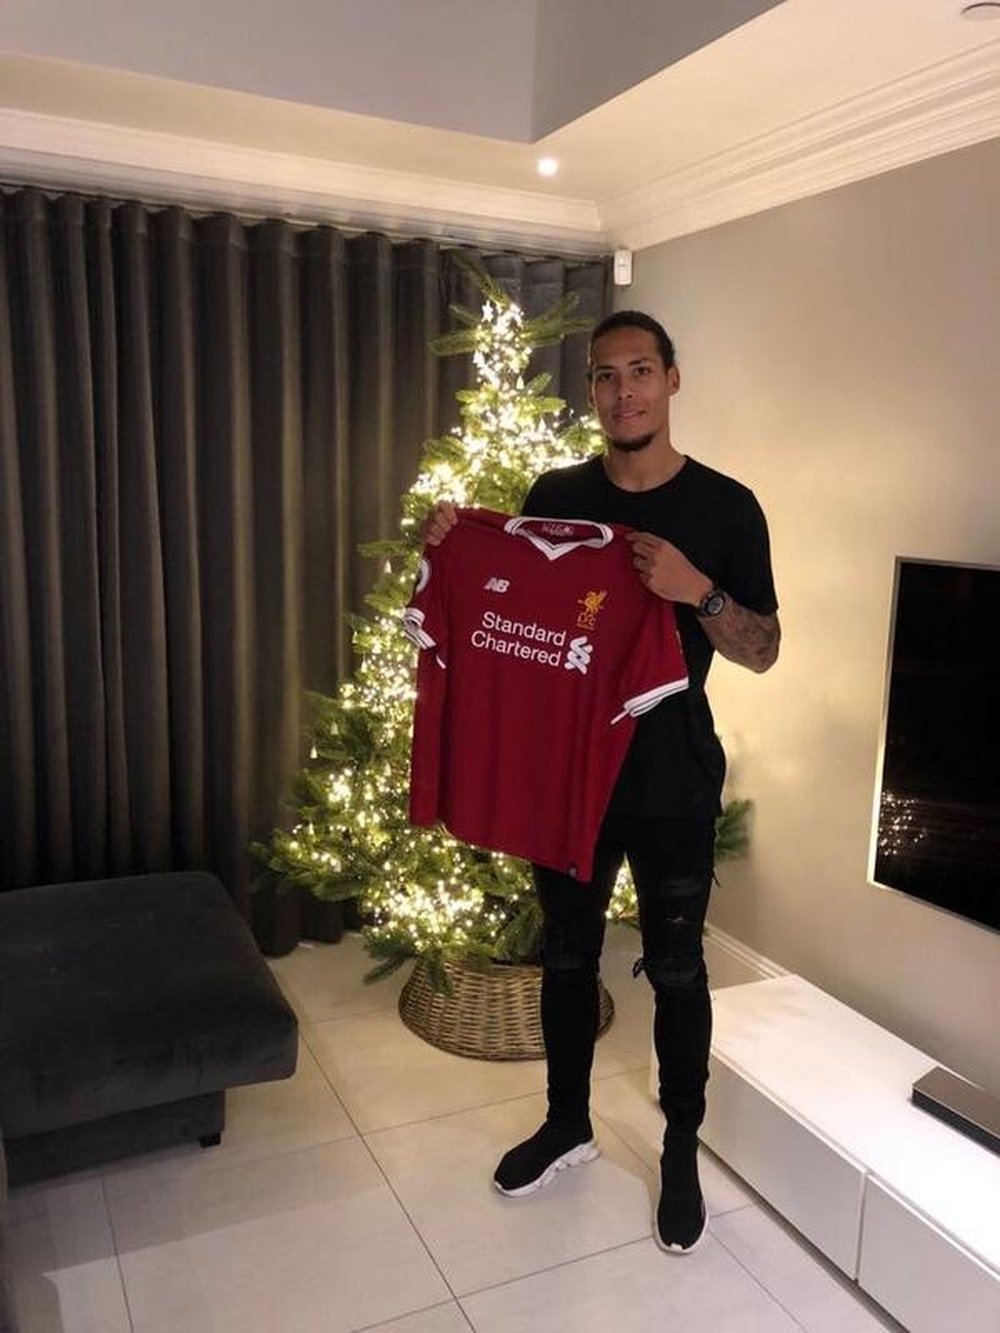 Liverpool have agreed a deal for Van Dijk. Twitter/LFC